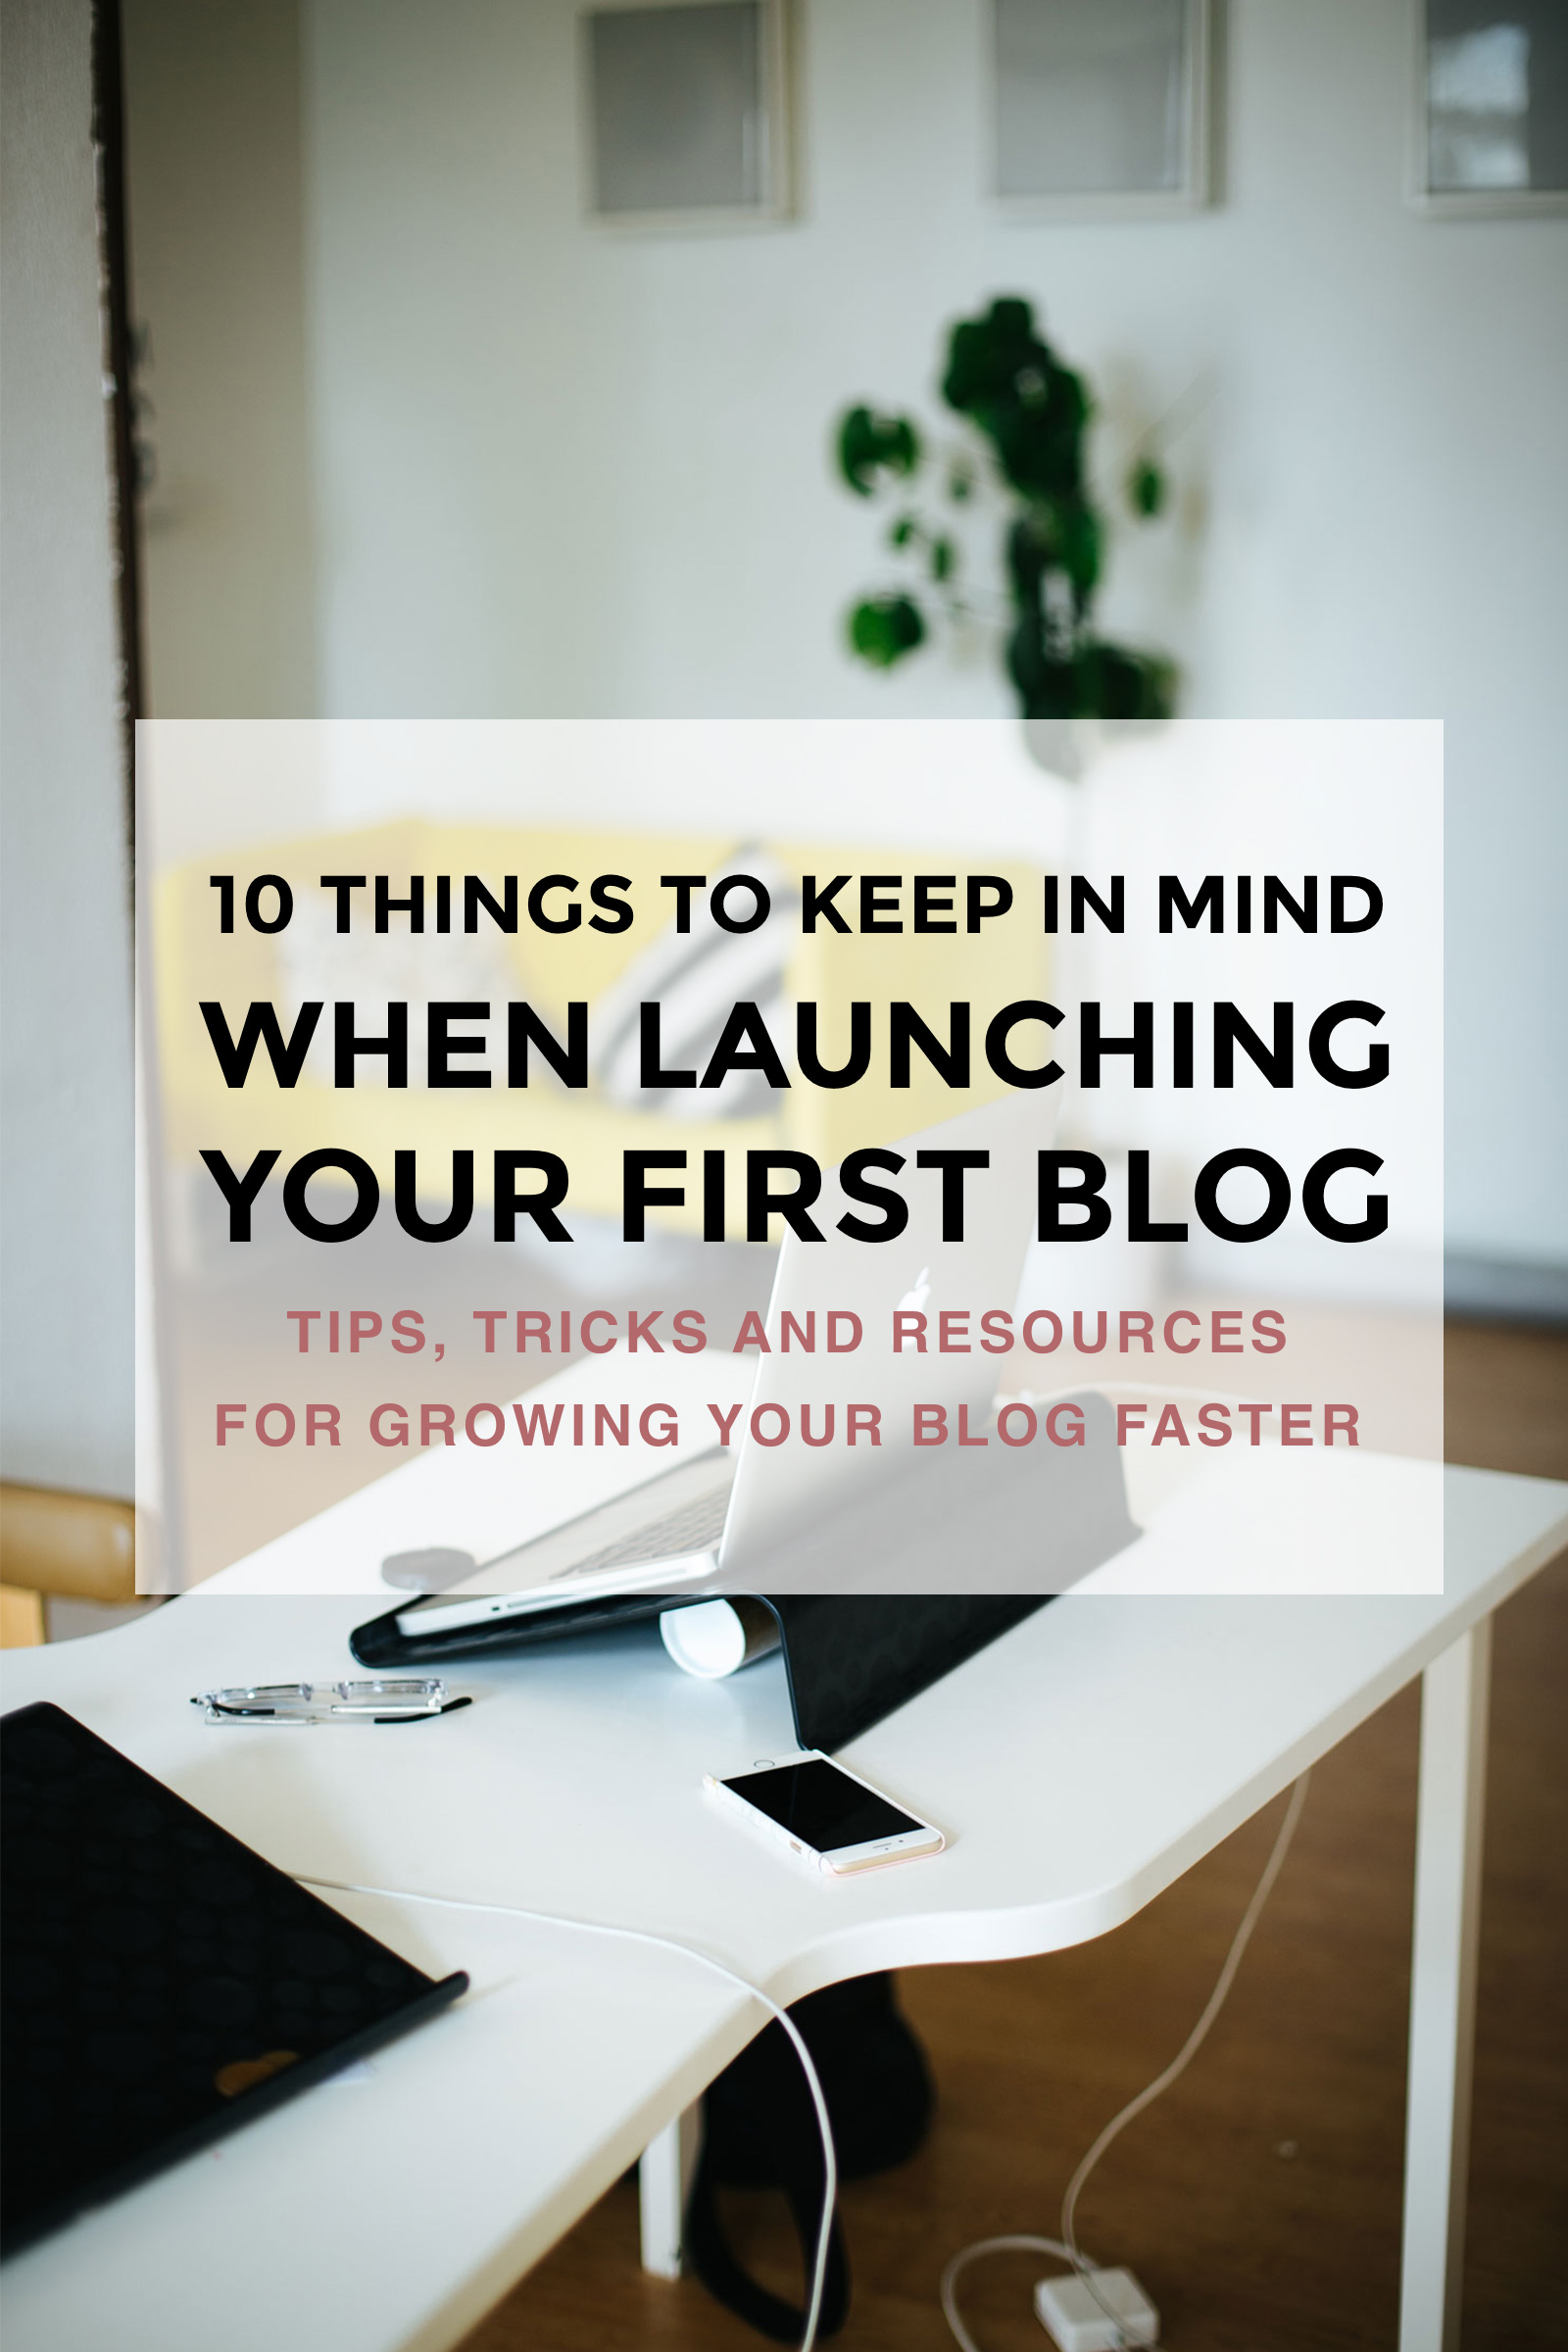 If you're currently working on your first blog, first of all- congratulations. You're going to have lots of fun, trust me. Secondly, you came to the right place! I've been blogging full-time for over three years, and I think I finally cracked the code to making my life as a blogger way easier. In this post, I'm going to reveal my tips, tricks and top resources that you should keep in mind when launching your first blog.